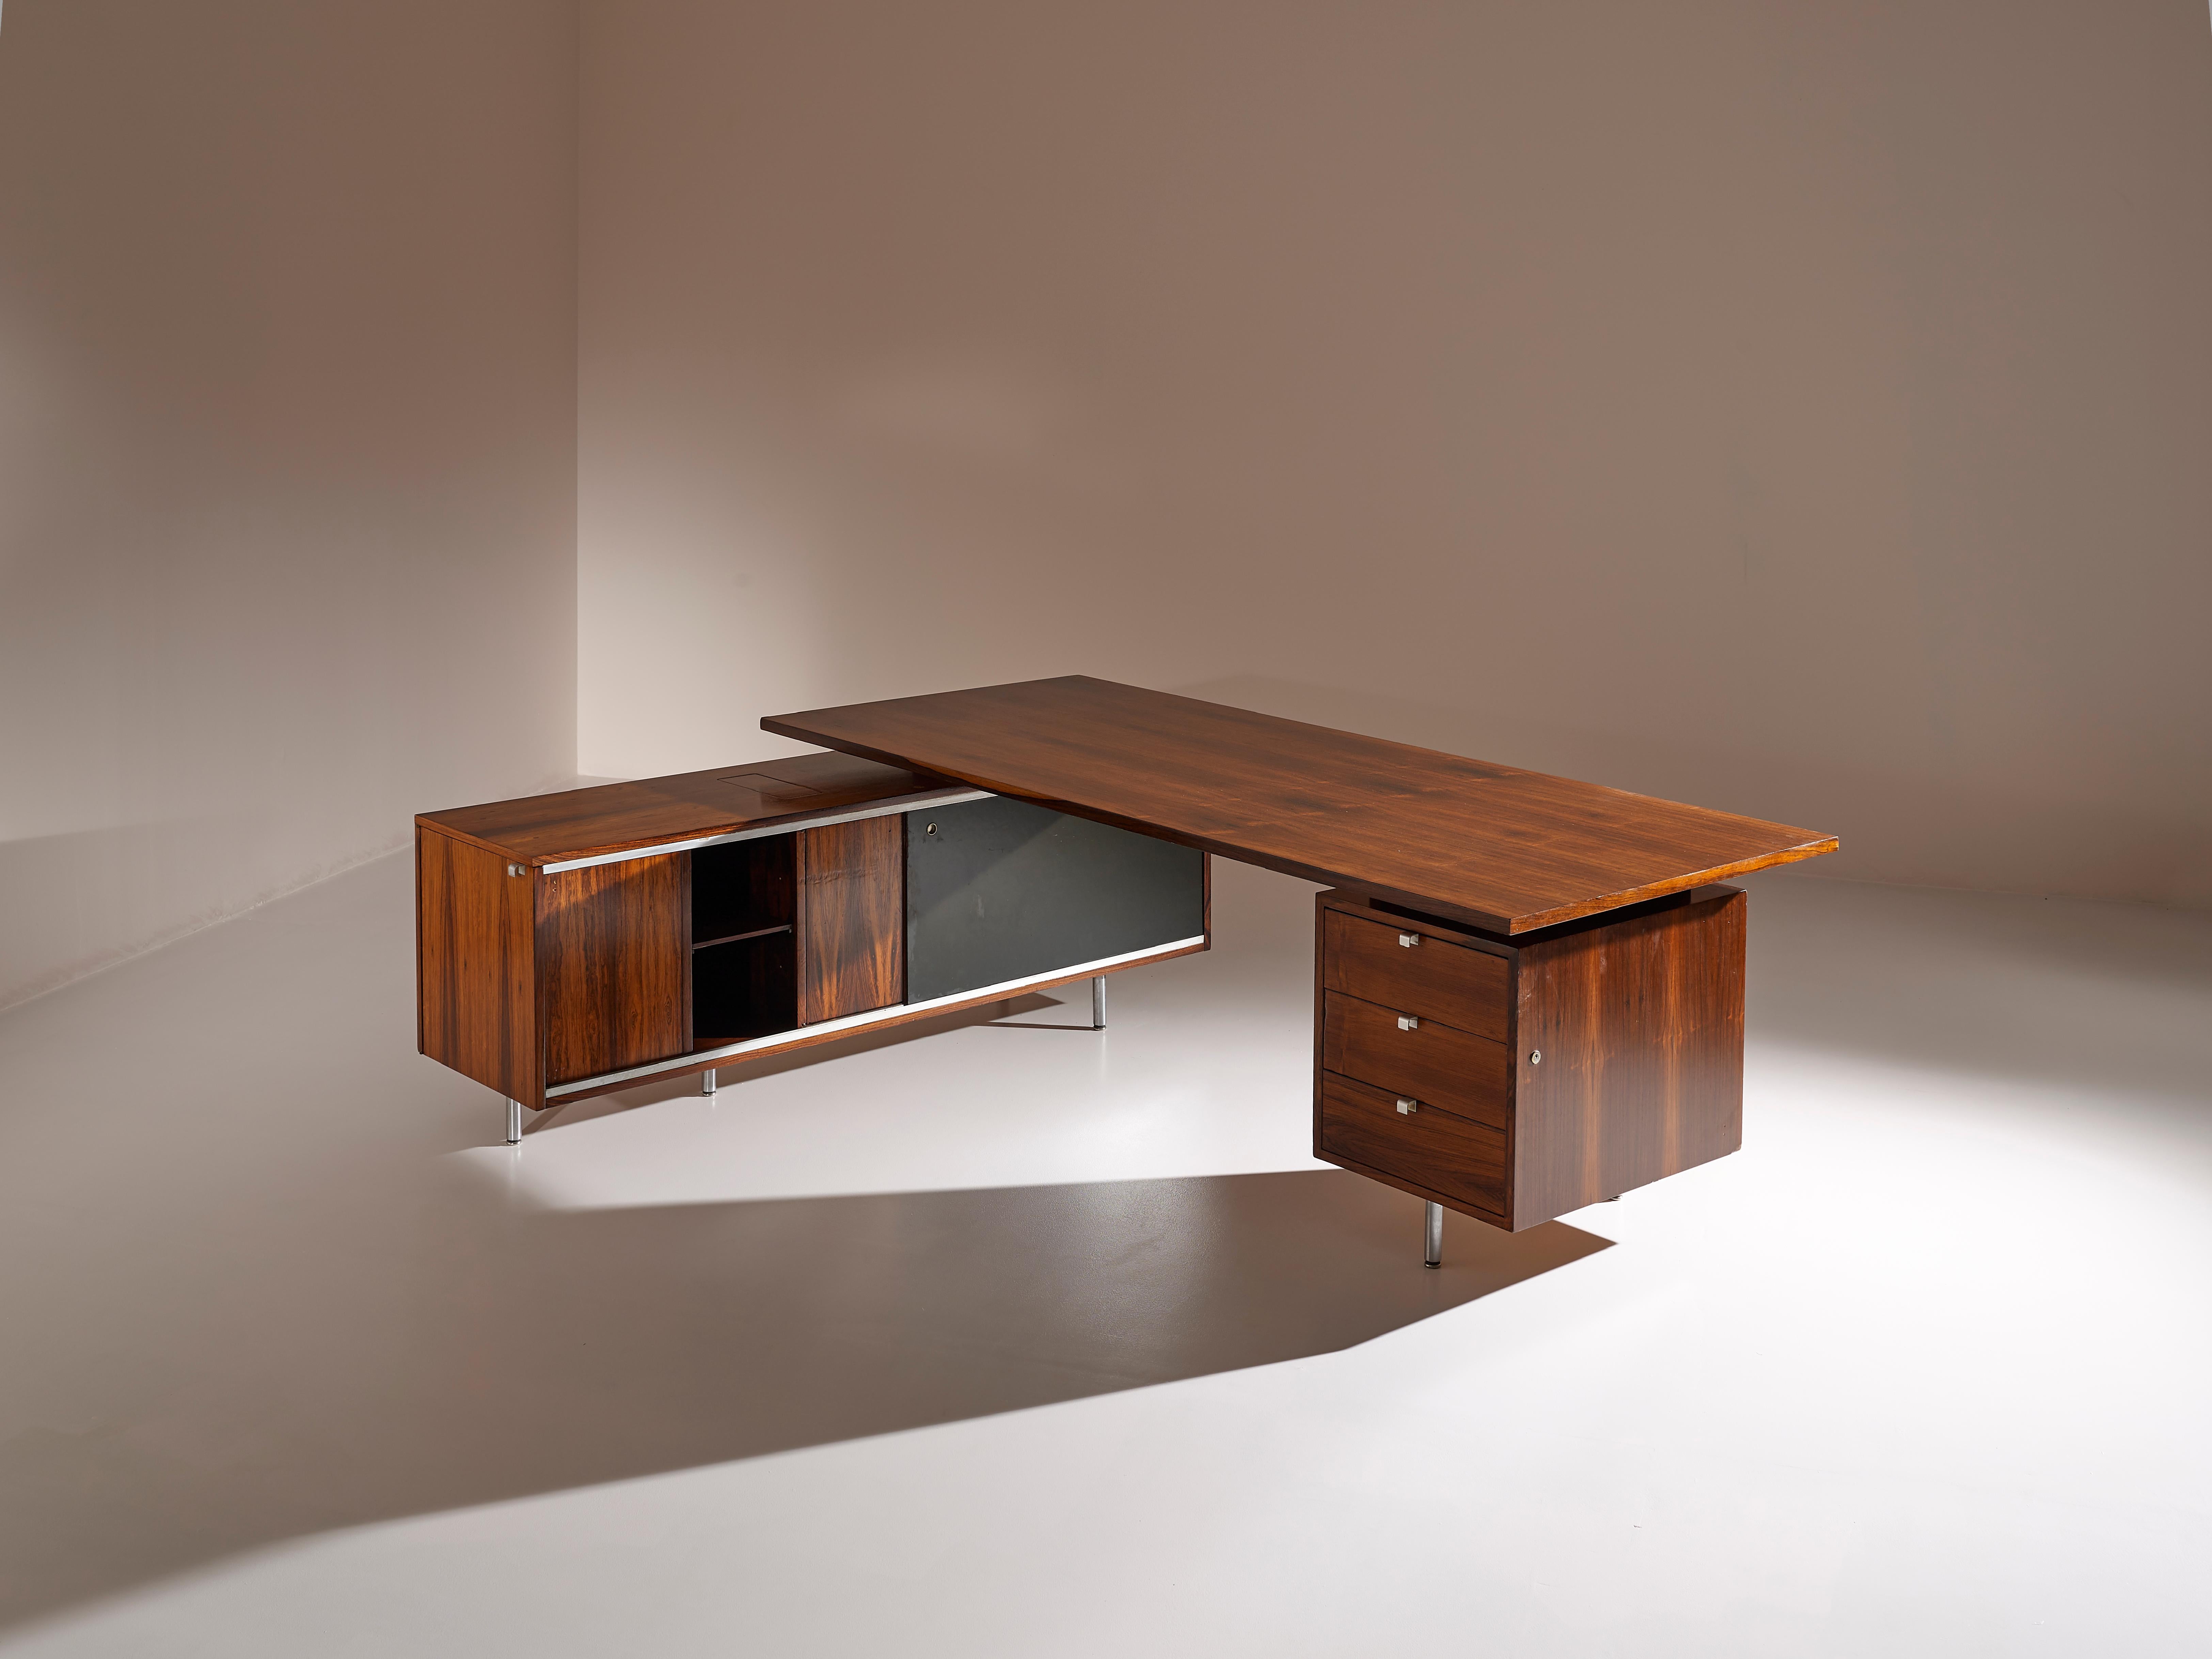 A rare and large Mid-Century Modern L-shaped executive desk designed by George Nelson for Herman Miller in the 1960s

The desk features an amazing rosewood wood grain, with polished stylish metal feet and hardware. Its sideboard provides vast